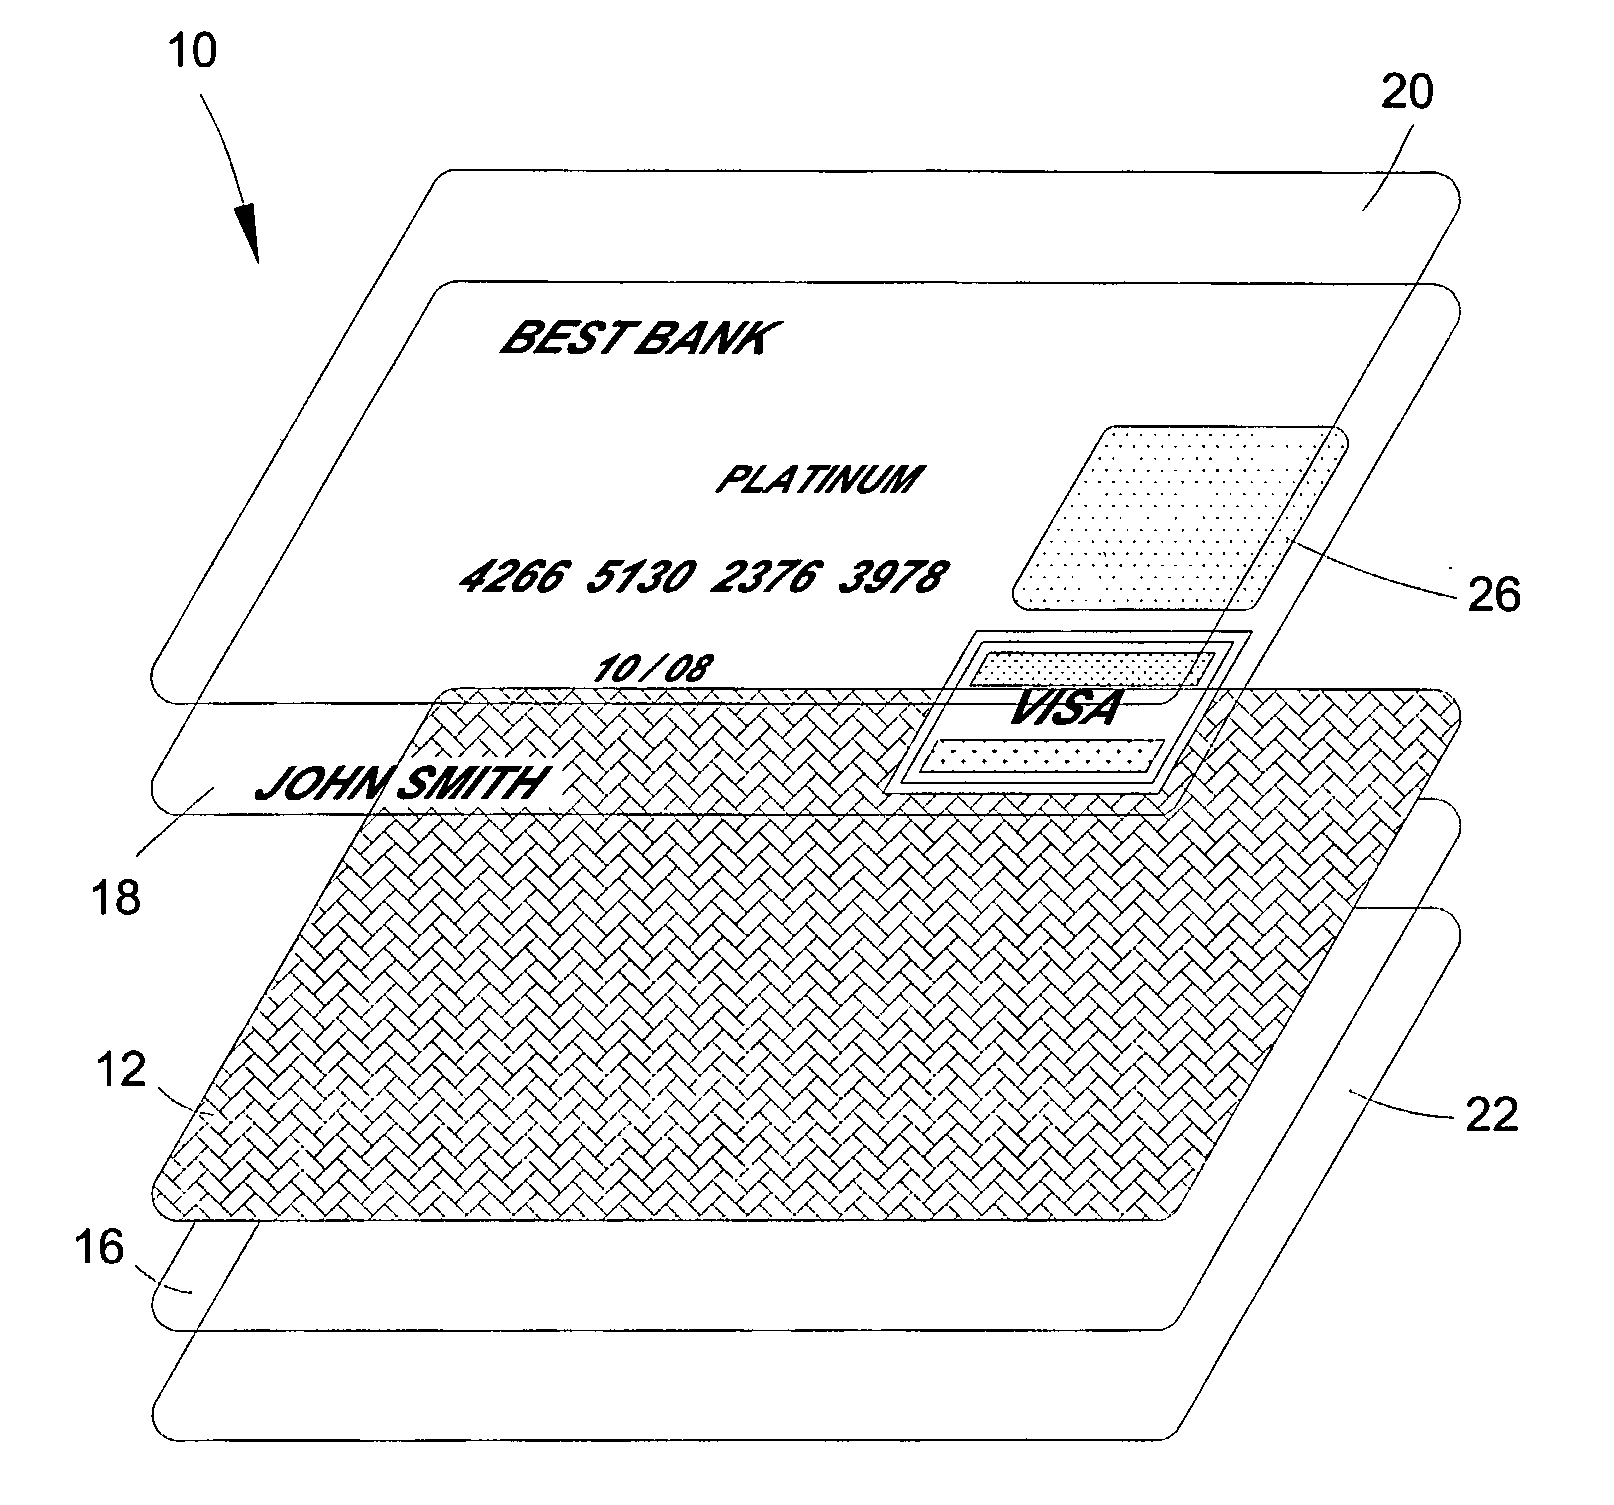 Multi-Layer Cards with Aesthetic Features and Related Methods of Manufacturing